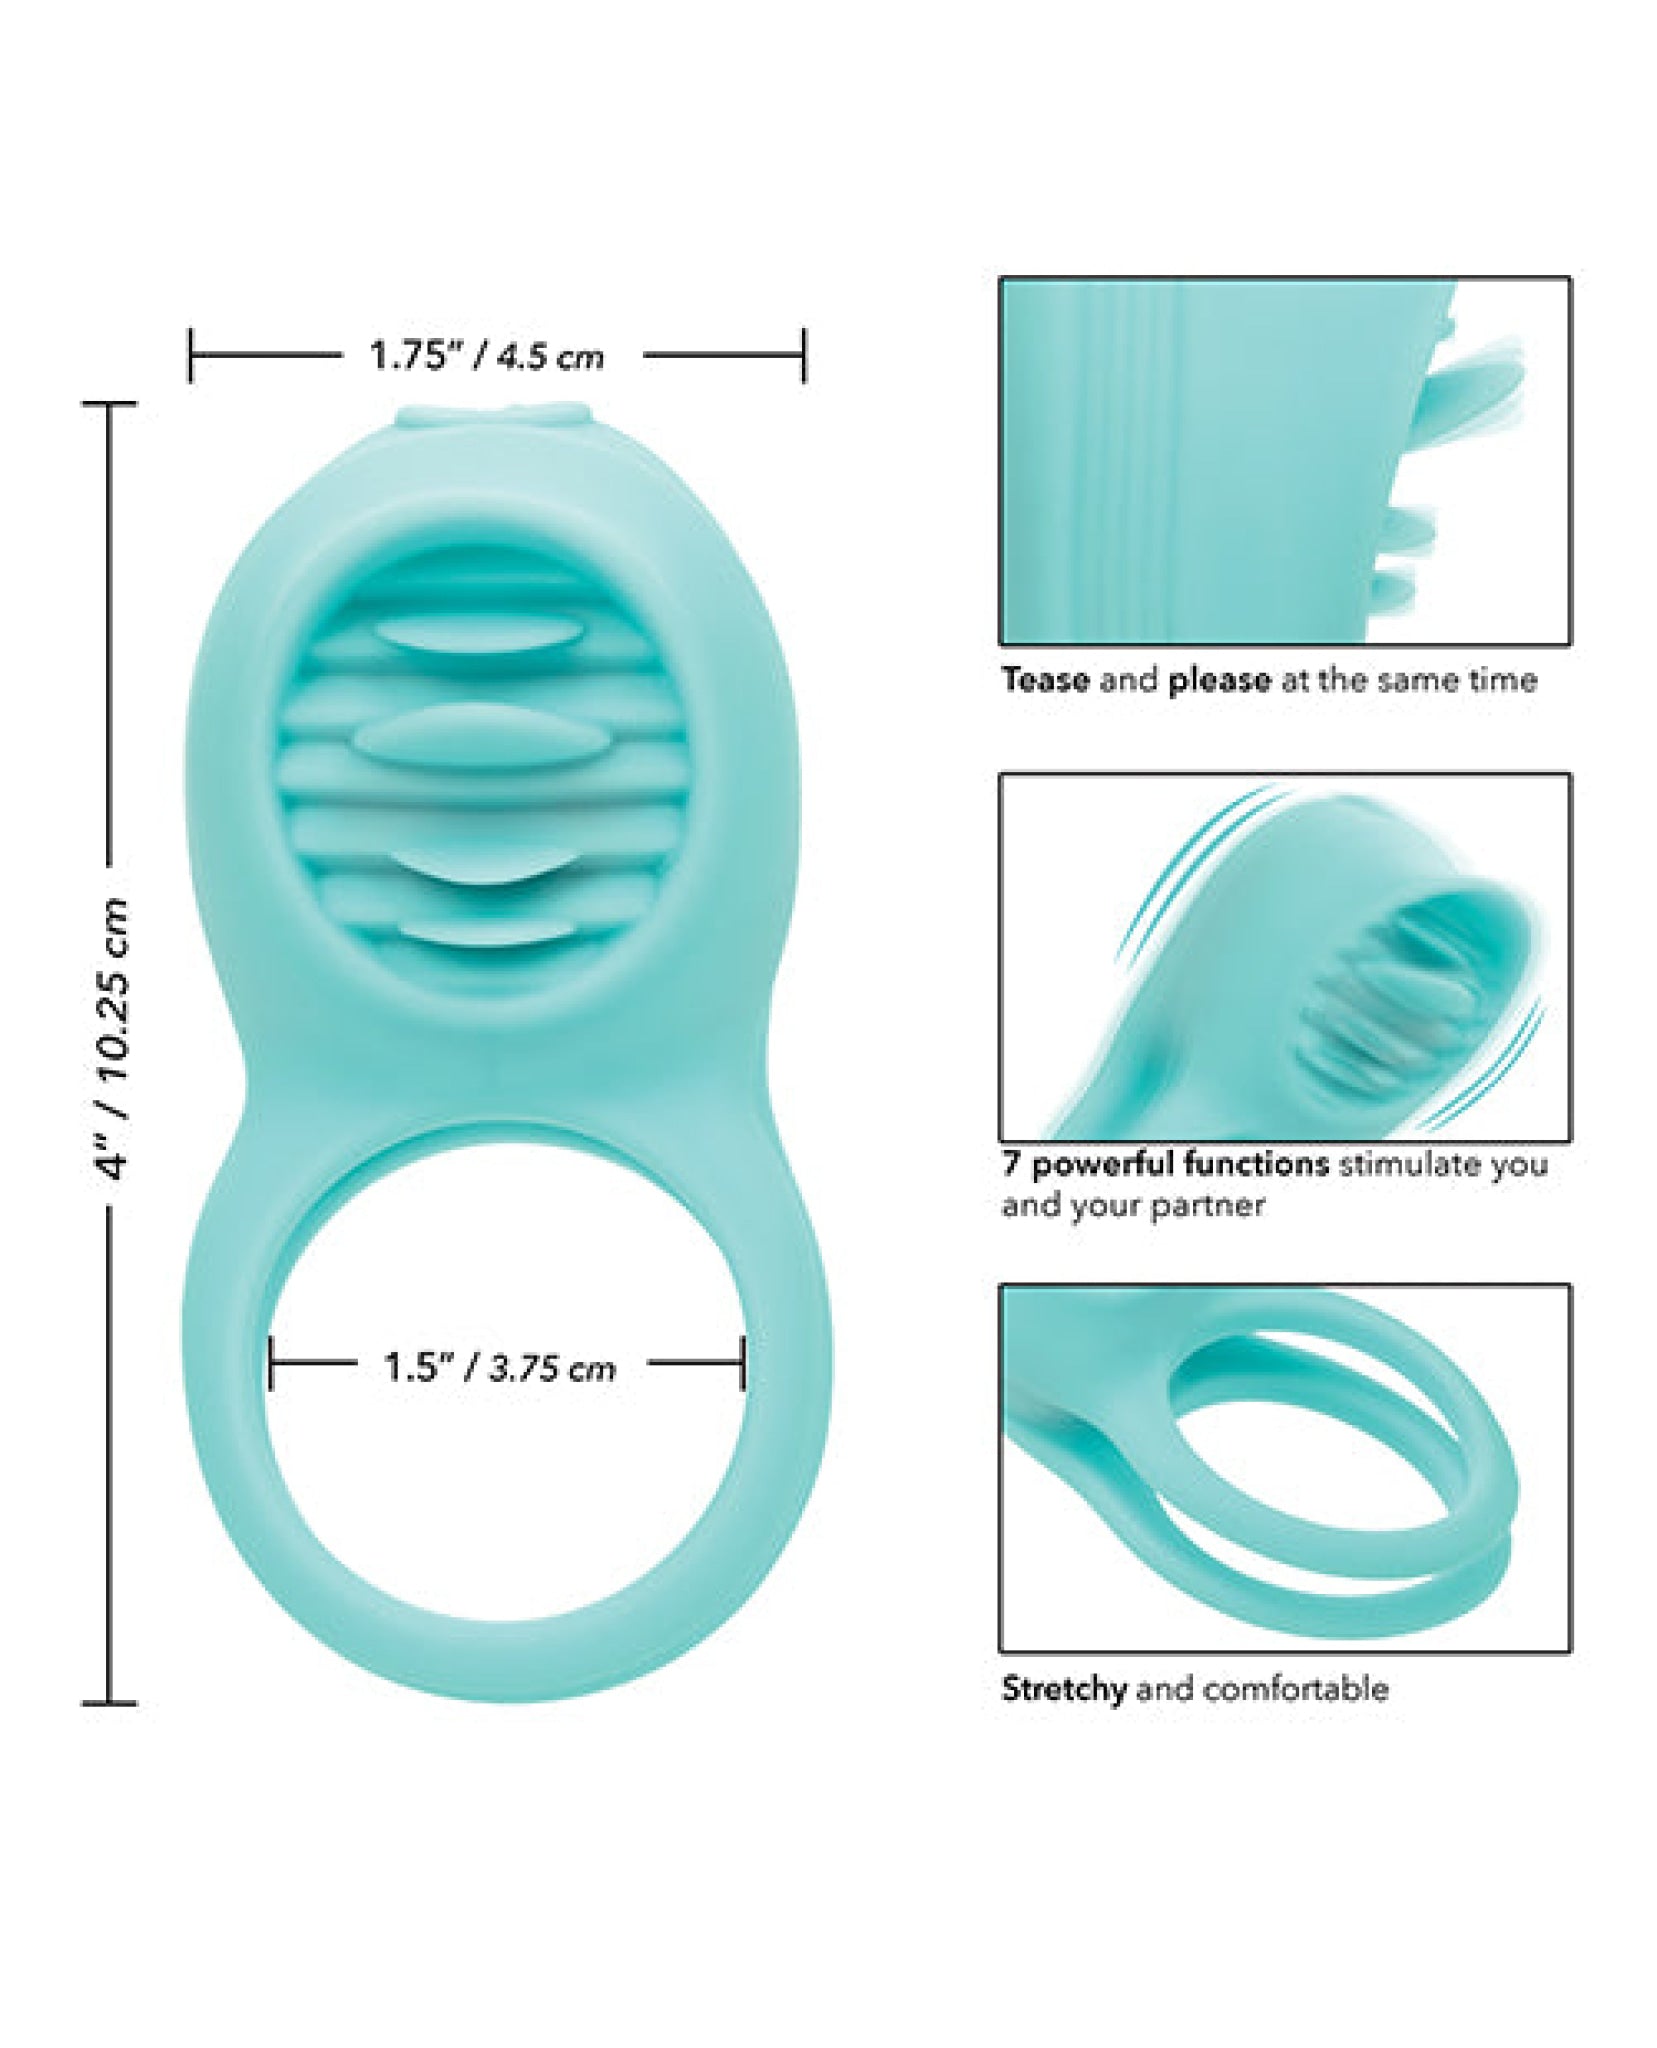 Couple's Enhancers Silicone Rechargeable French Kiss Enhancer - Teal California Exotic Novelties